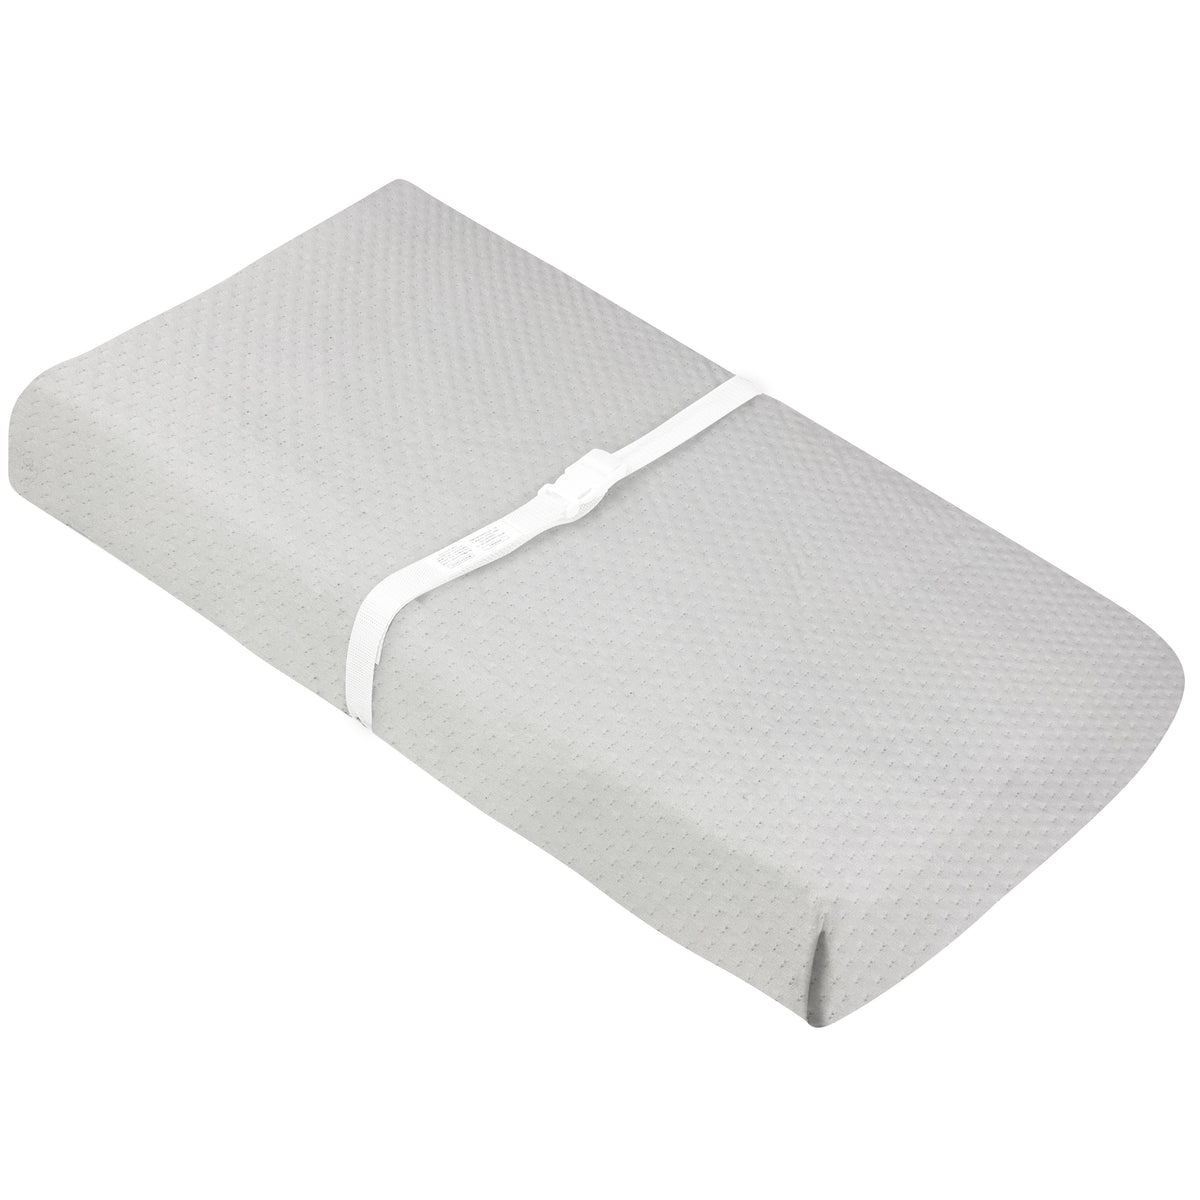 Light Waterproof | Changing Pad Cover